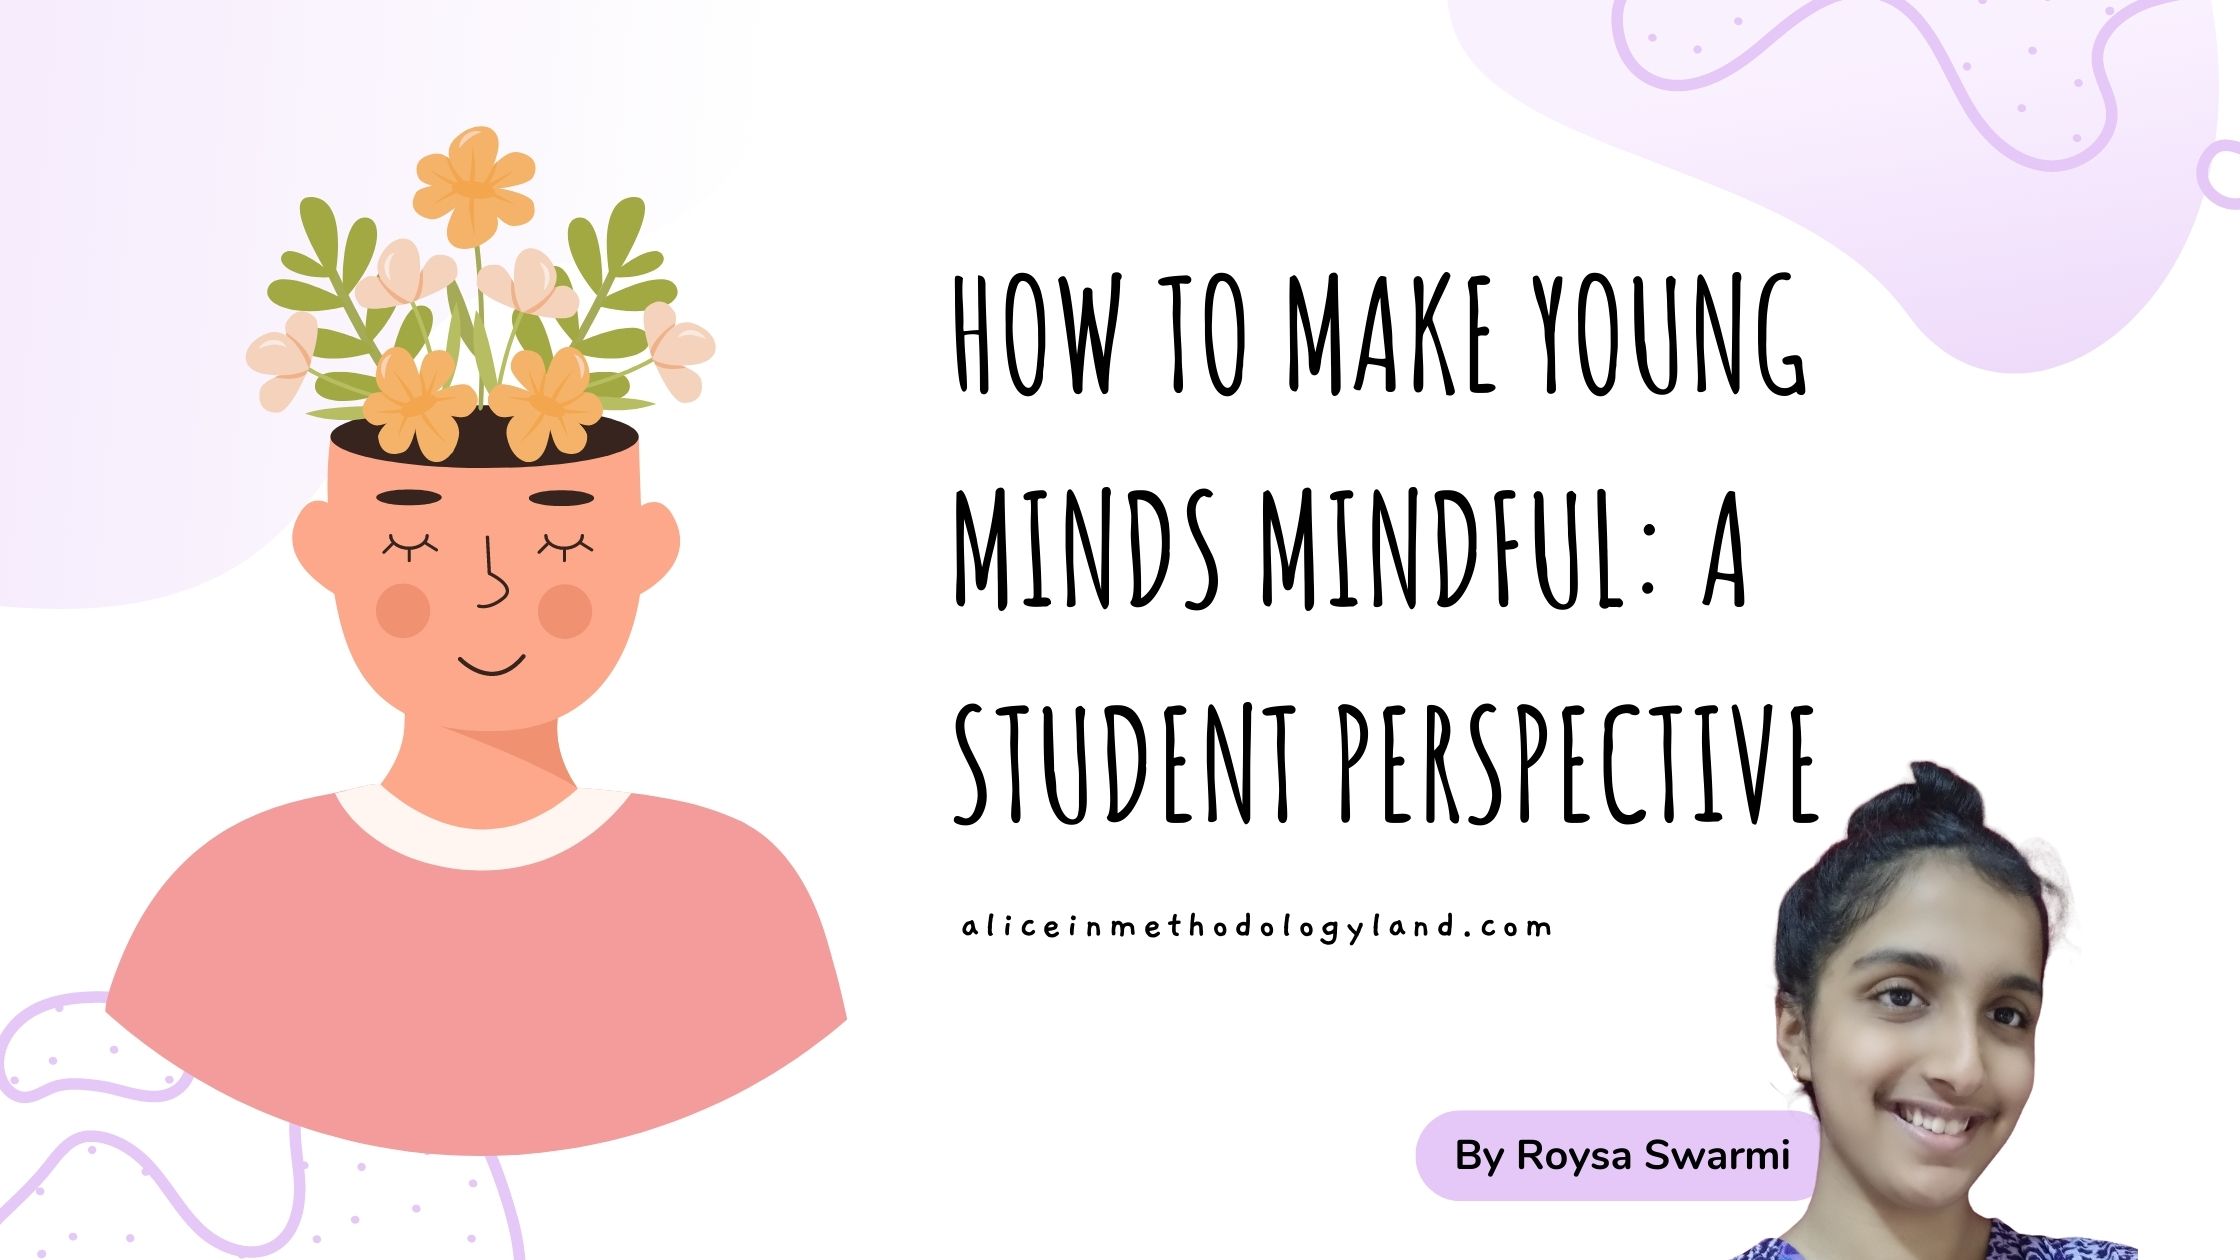 How to Make Young Minds Mindful: A Student Perspective by Roysa Swarmi